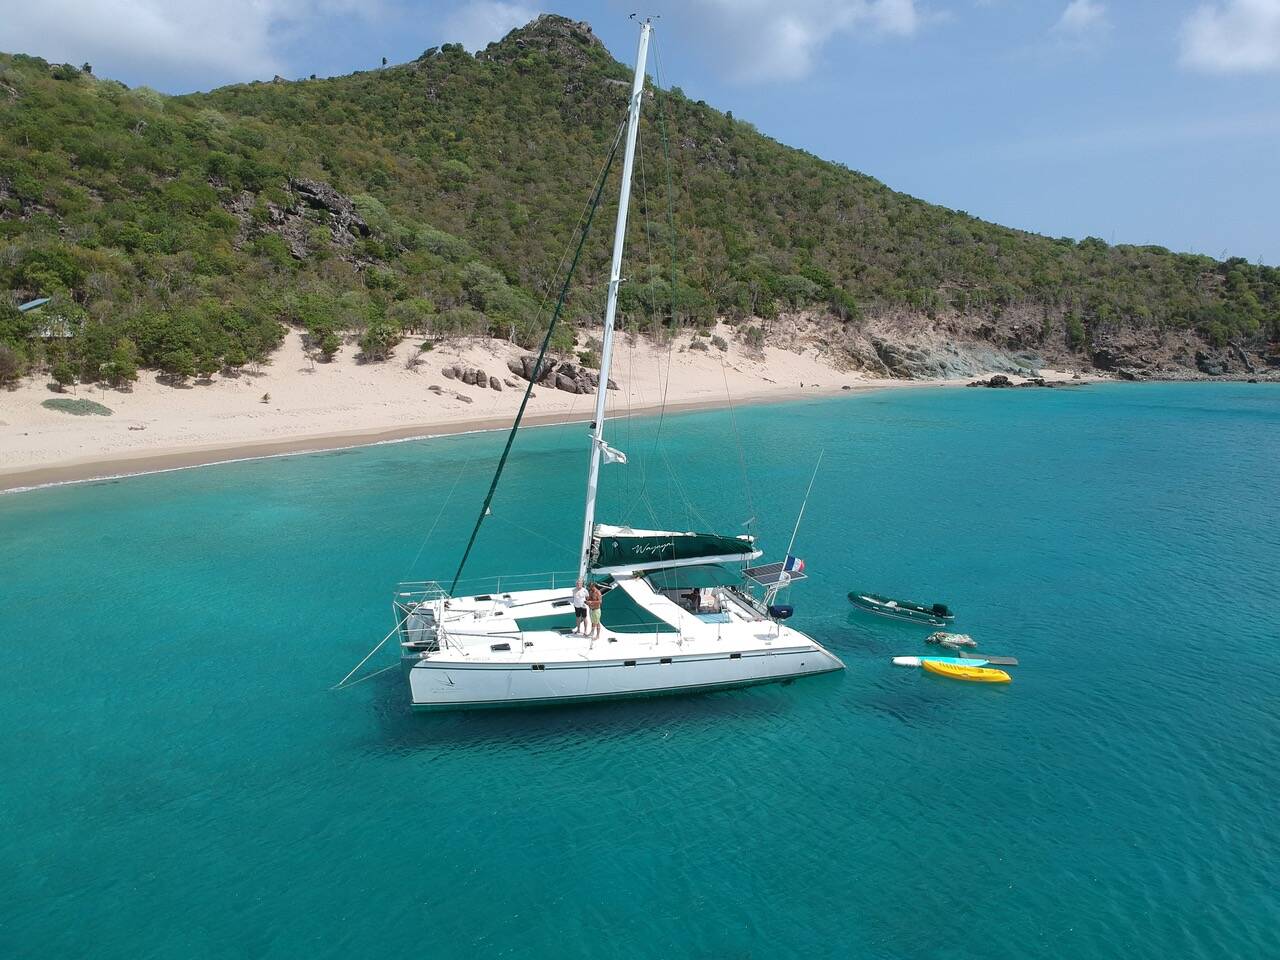 SAINT BARTH EXCURSIONS | Boat rental in St Barts | Reservations 24/7